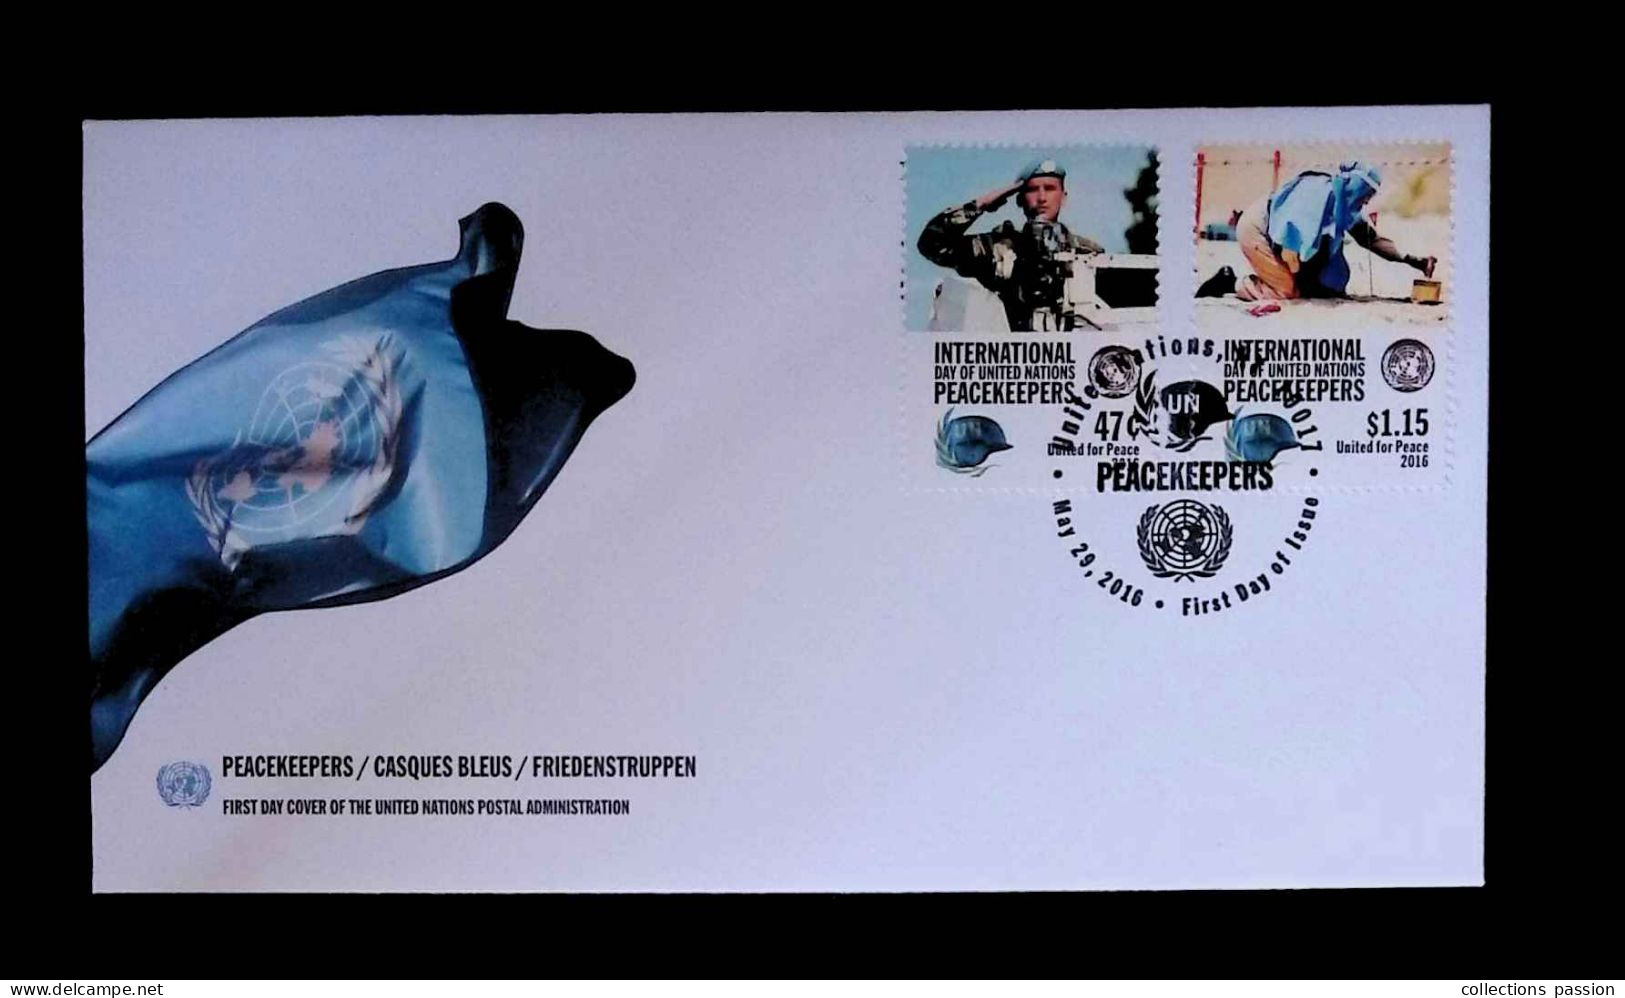 CL, FDC, 1 Er Jour, United Nations, NY 10017, May 29, 2016, Peacekeepers, Casques Bleus, Militaria - FDC